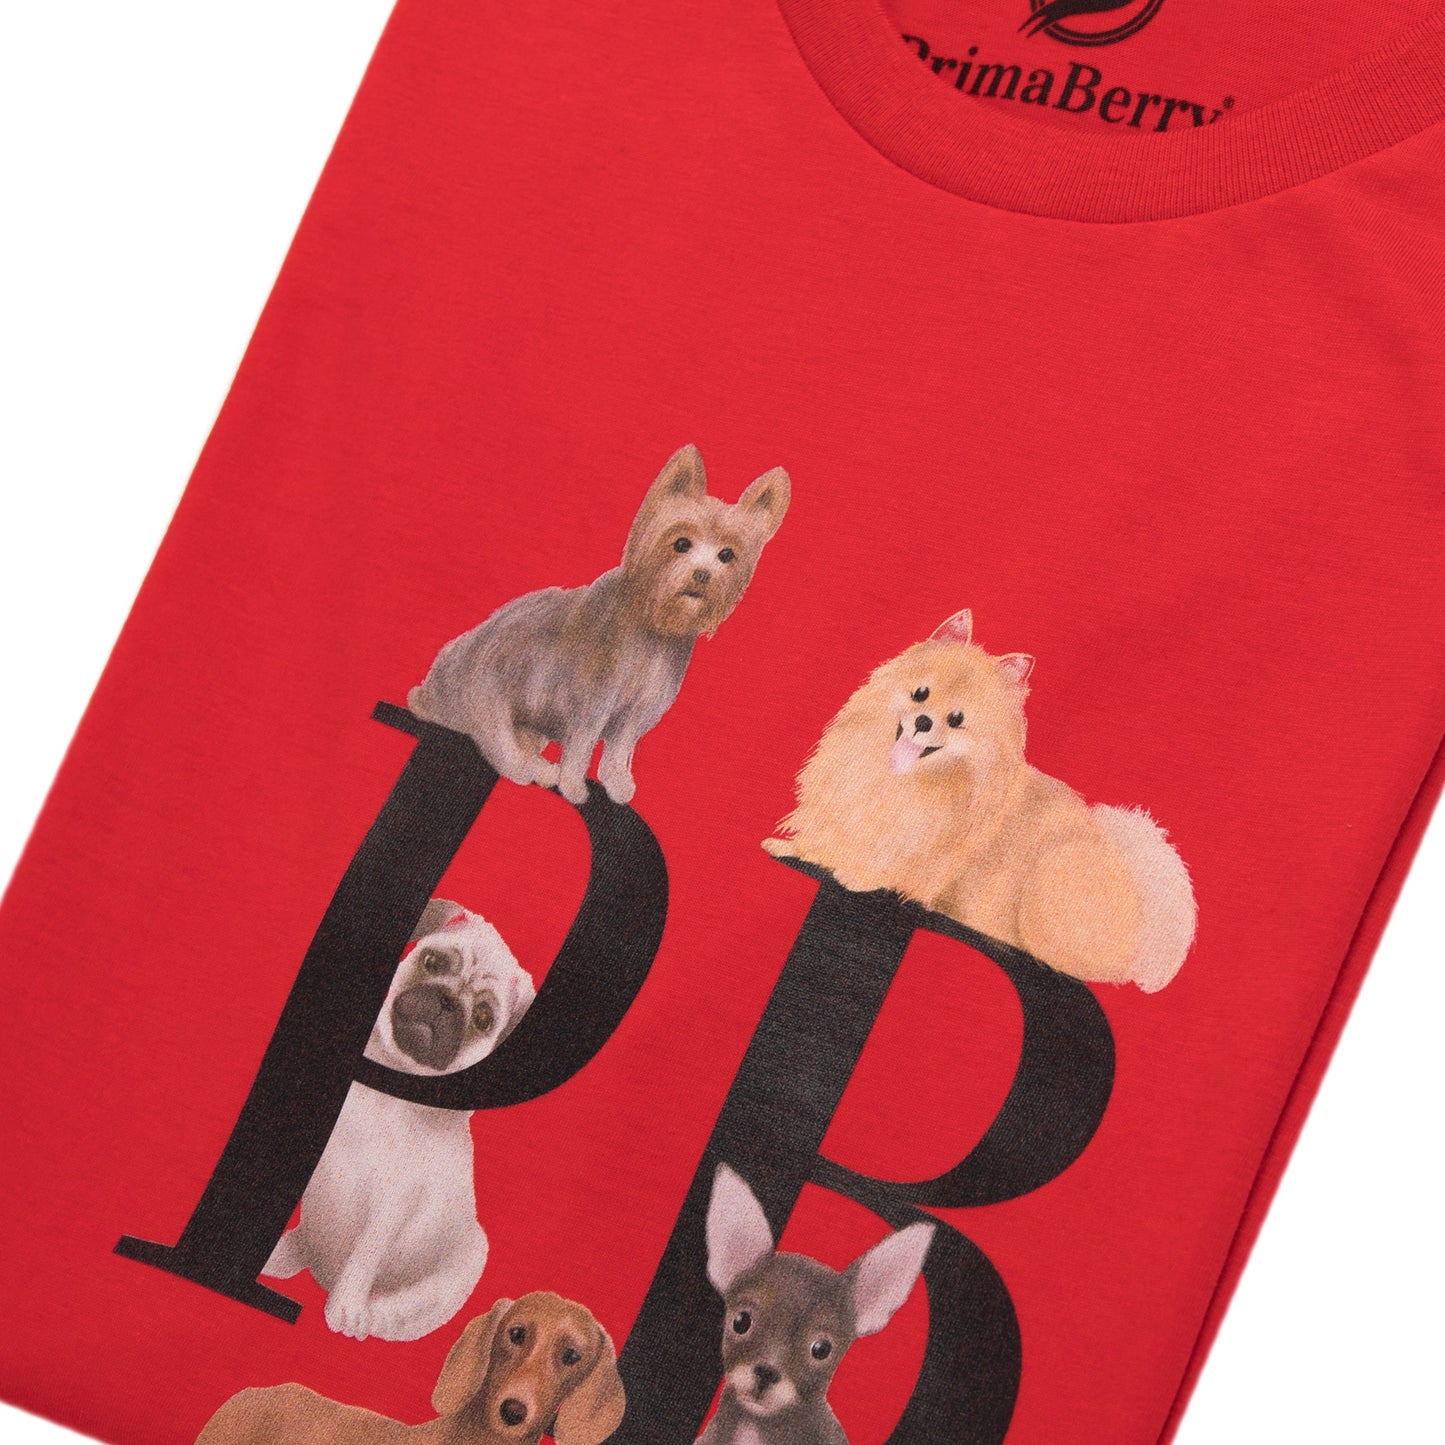 Dogmania Organic Cotton T-Shirt: Stylish and Sustainable T-Shirt for Dog Lovers